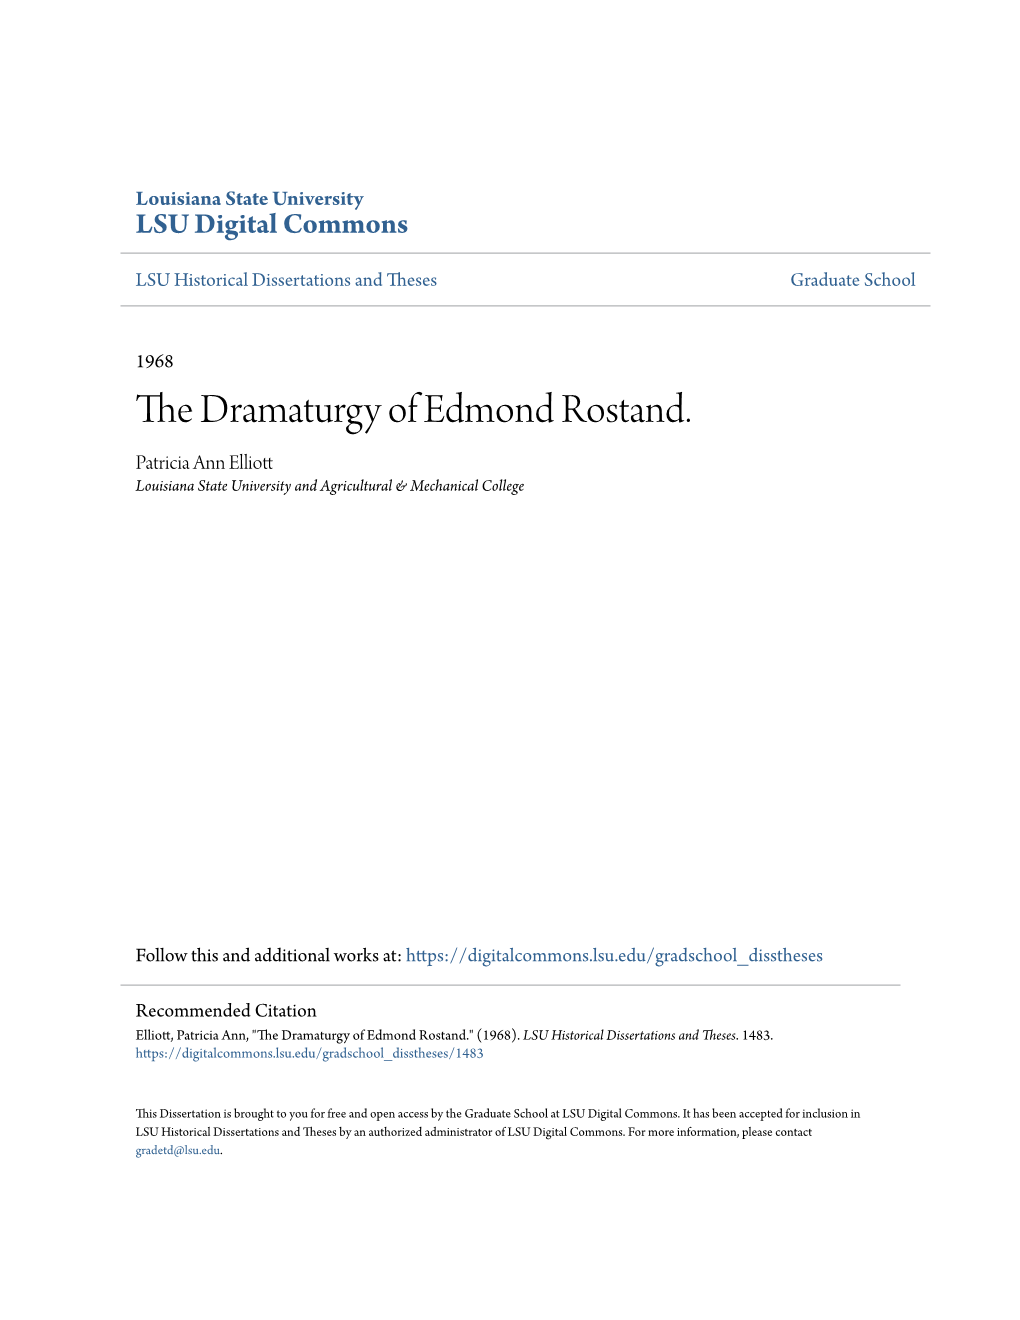 The Dramaturgy of Edmond Rostand. Patricia Ann Elliott Louisiana State University and Agricultural & Mechanical College